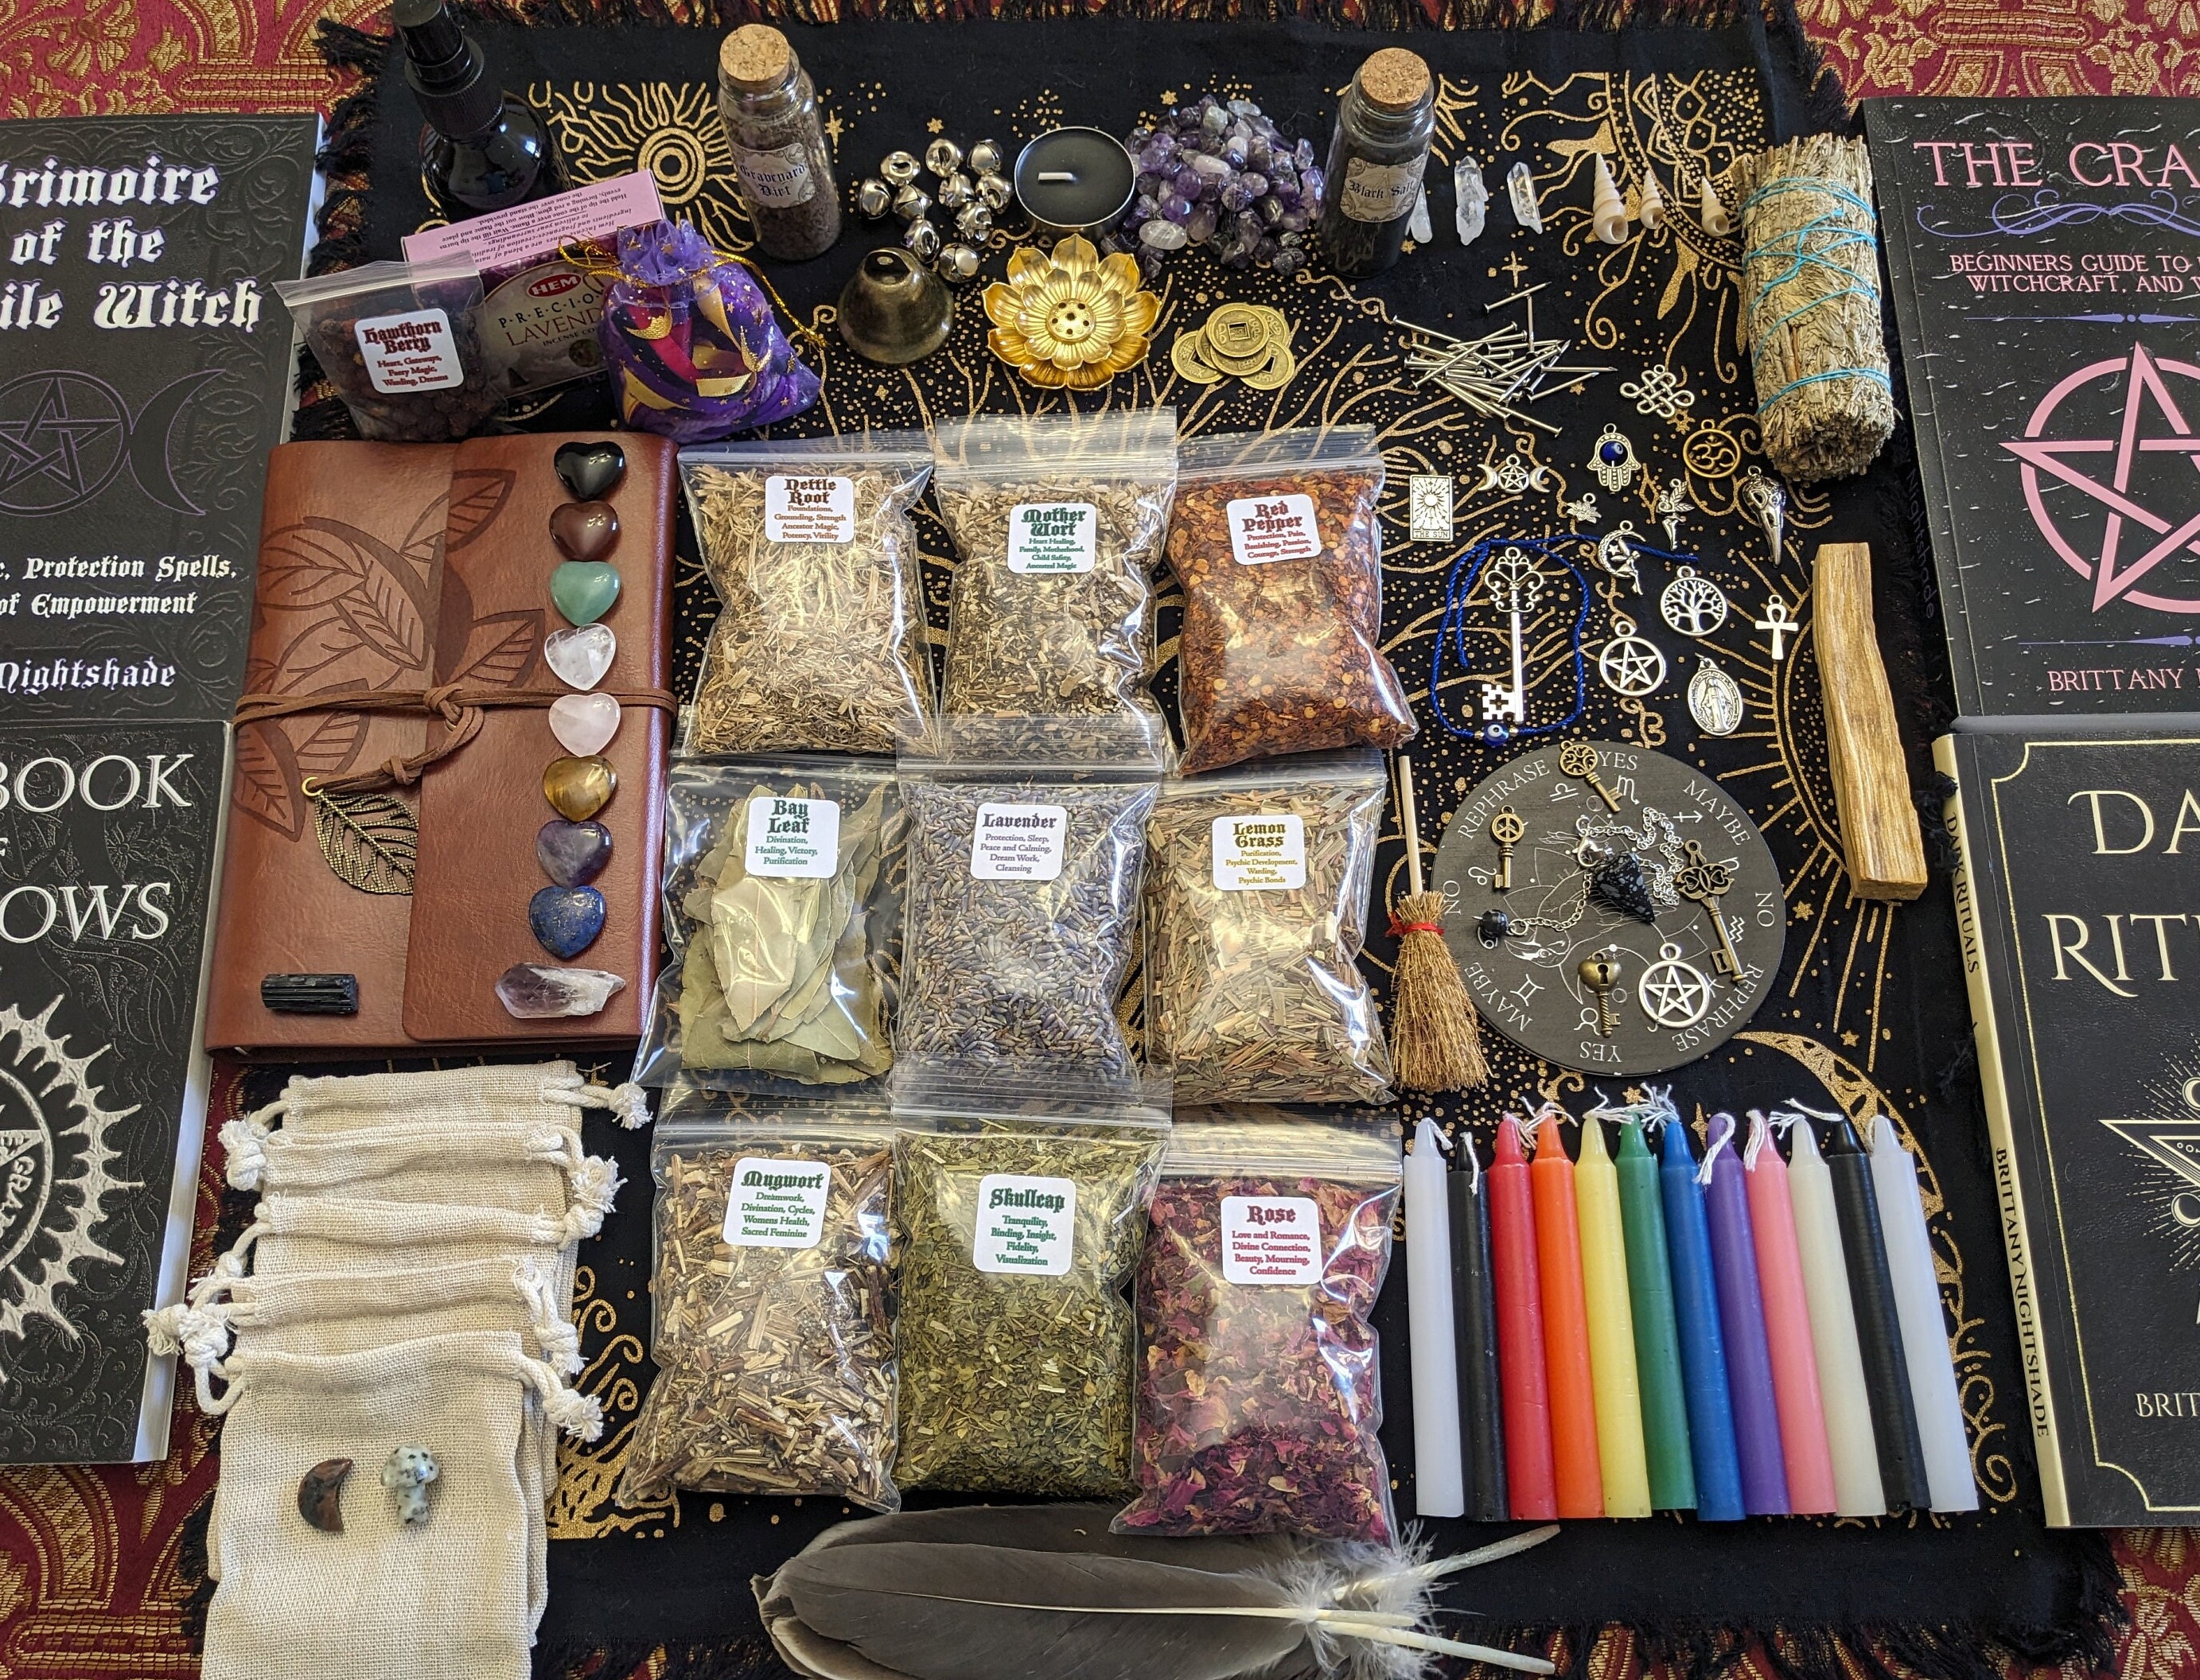 Witchcraft Starter Kit, Witchcraft Supplies For Wiccan Altar- 63 Pack Of  Crystals Dried Herbs, Colored Magic Candles, Charm Bags And Ritual Witches  Sa